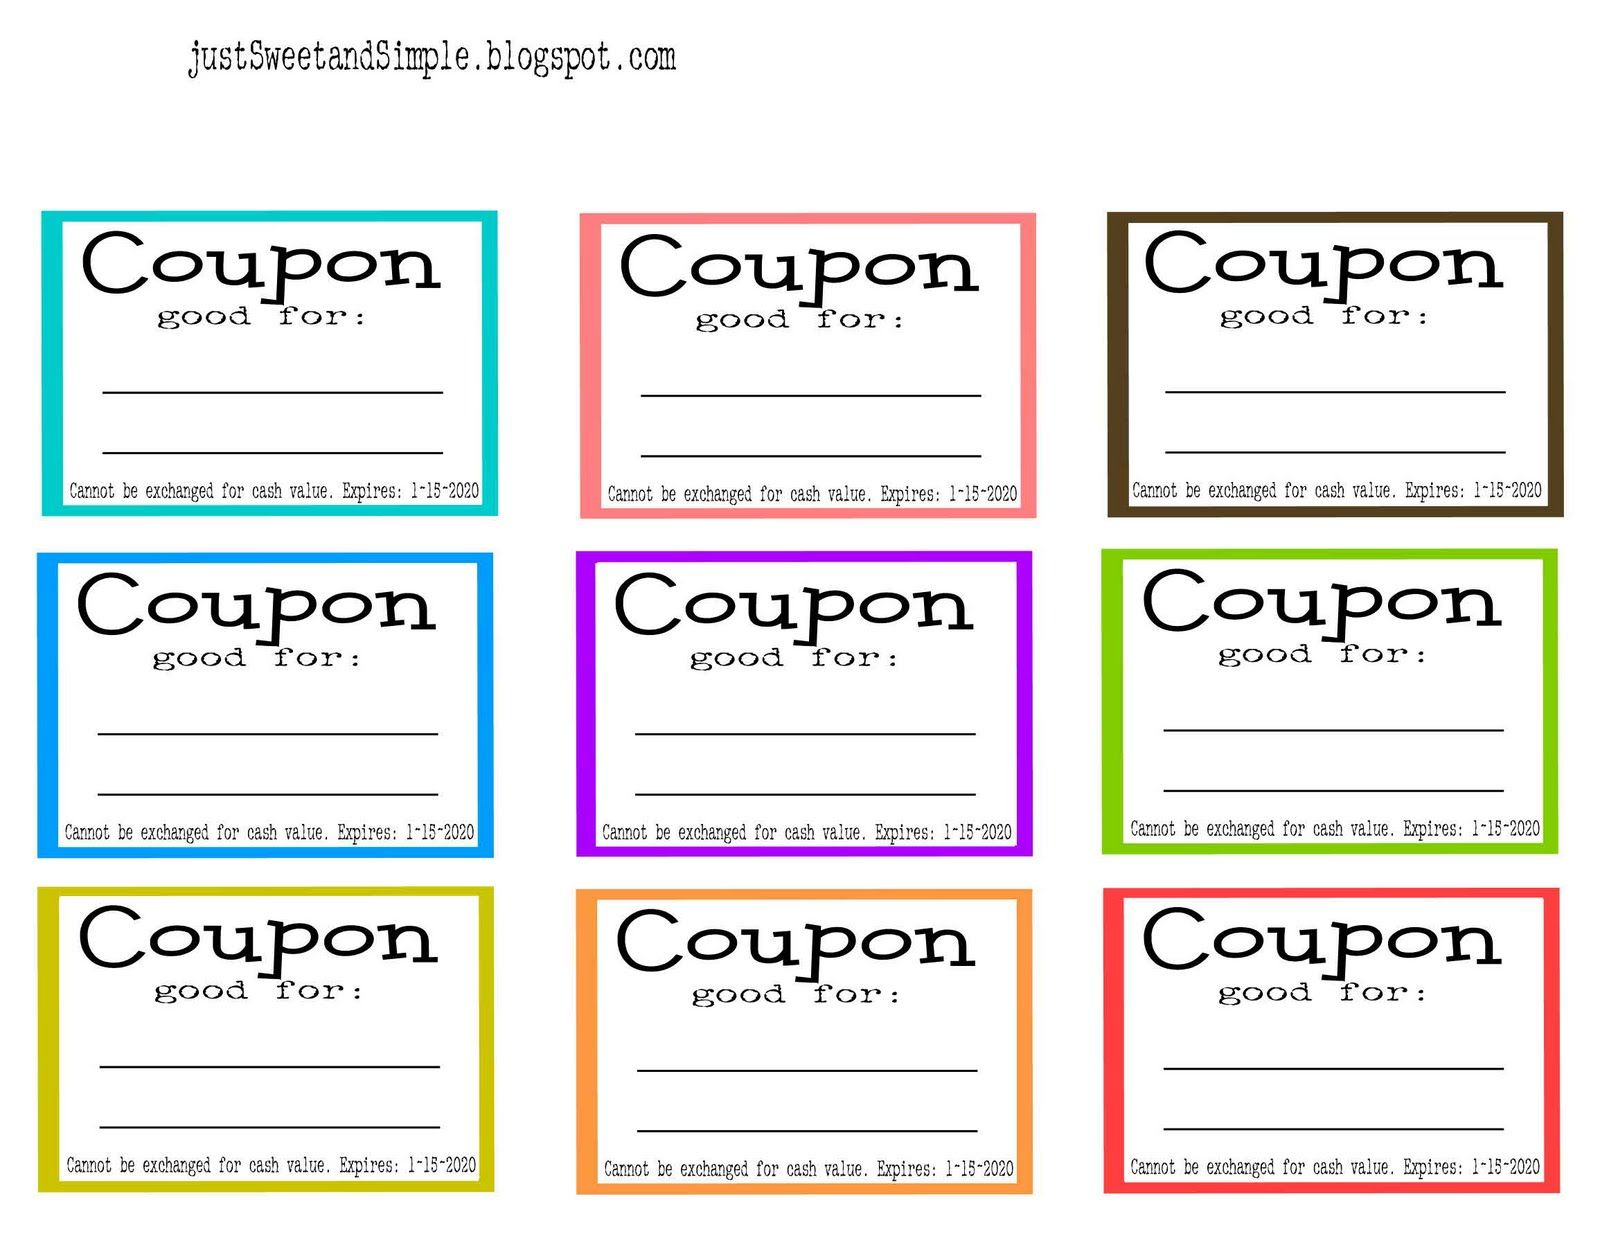 Chores+And+Cleaning+Ideas+For+Kids | Just Sweet And Simple Regarding Blank Coupon Template Printable